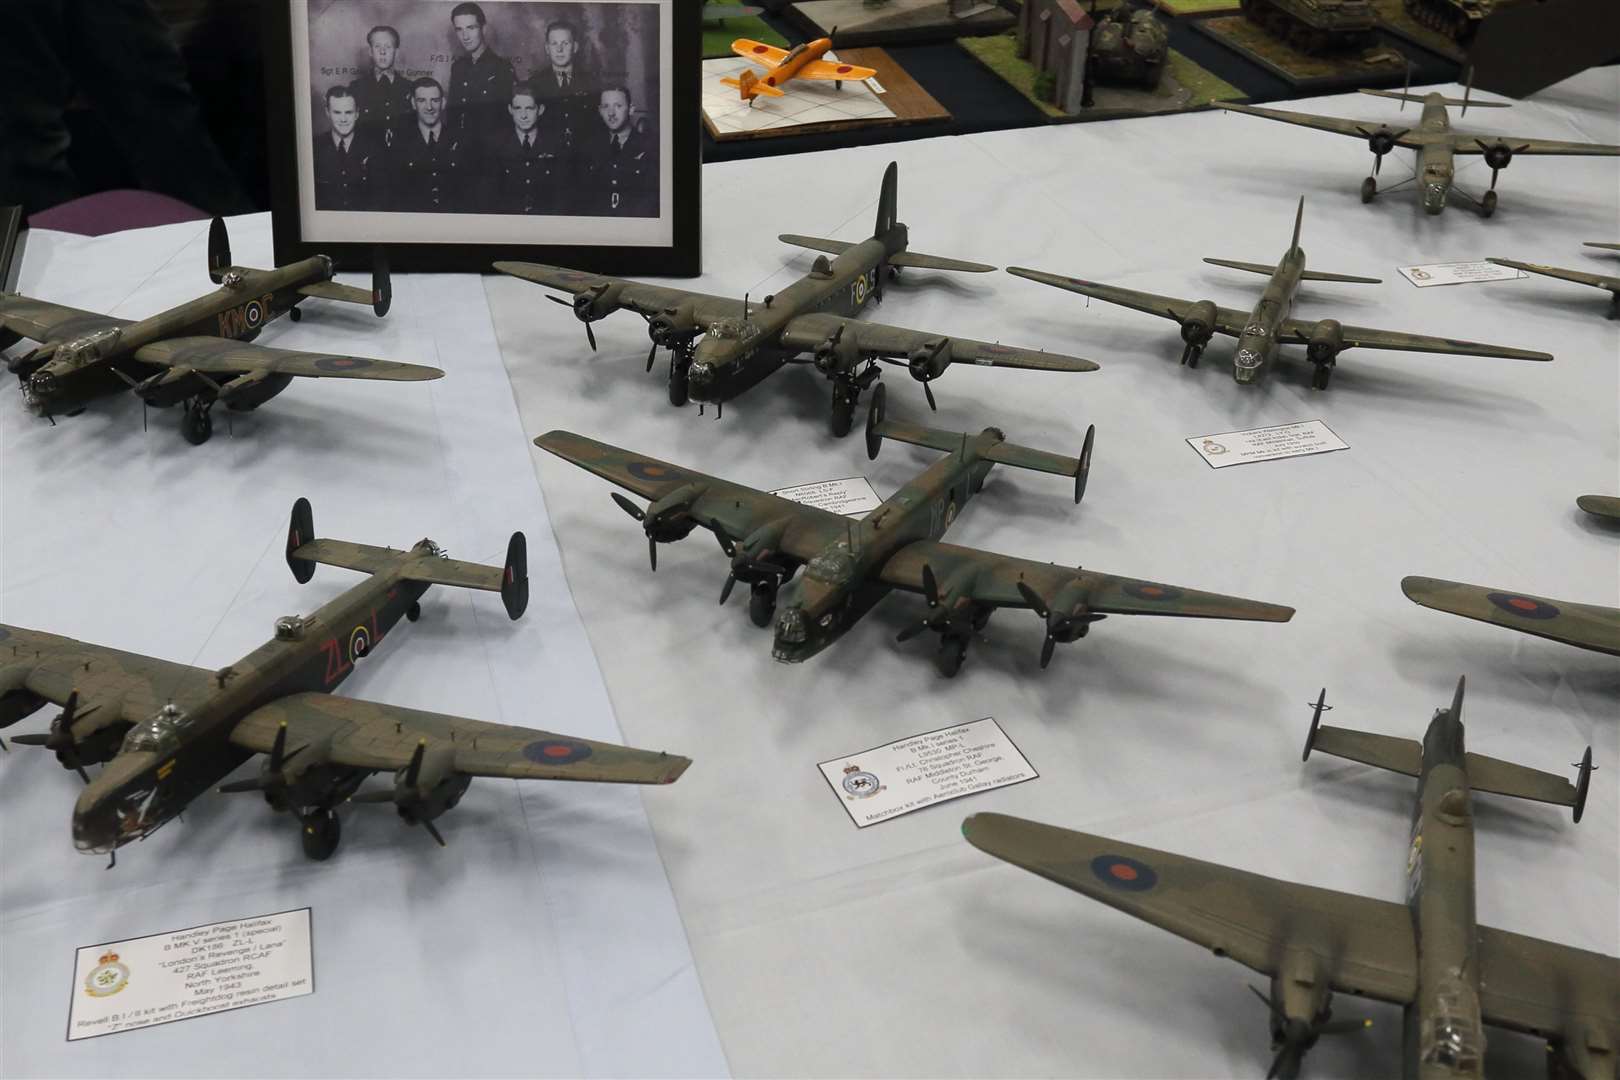 Aircraft from the Bomber Command specialist group.